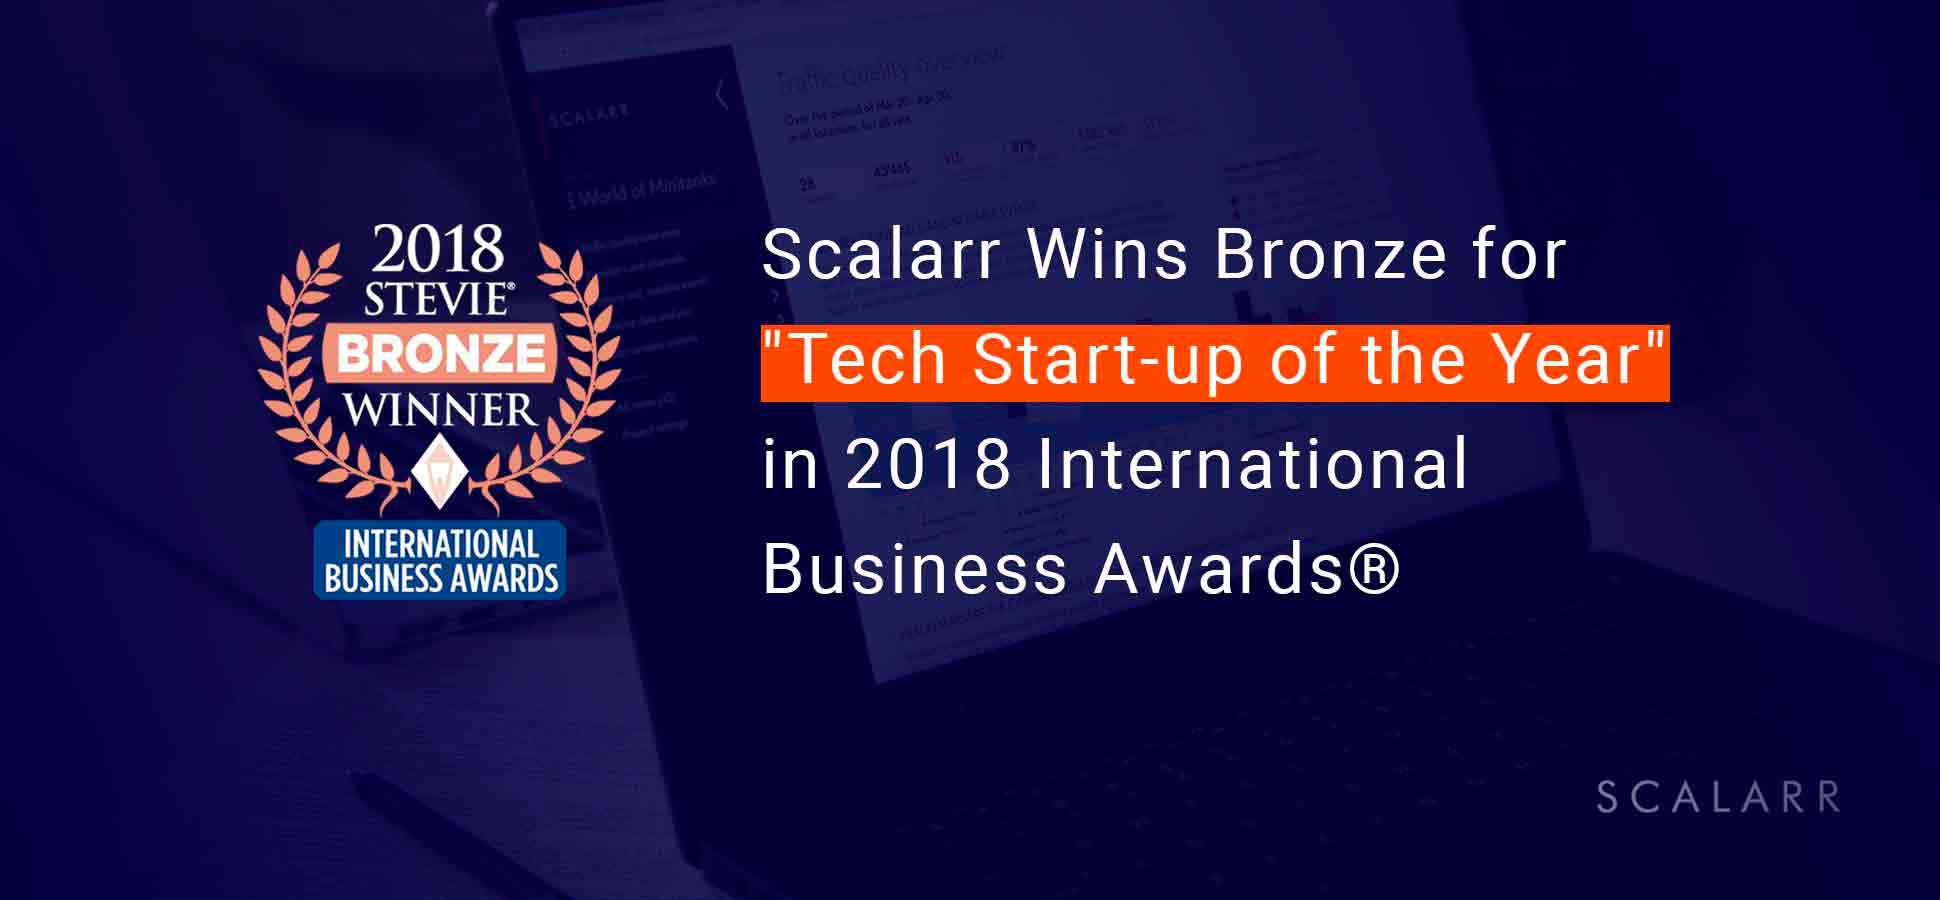 Scalarr Wins Bronze for “Tech Start-up of the Year” in 2018 International Business Awards®